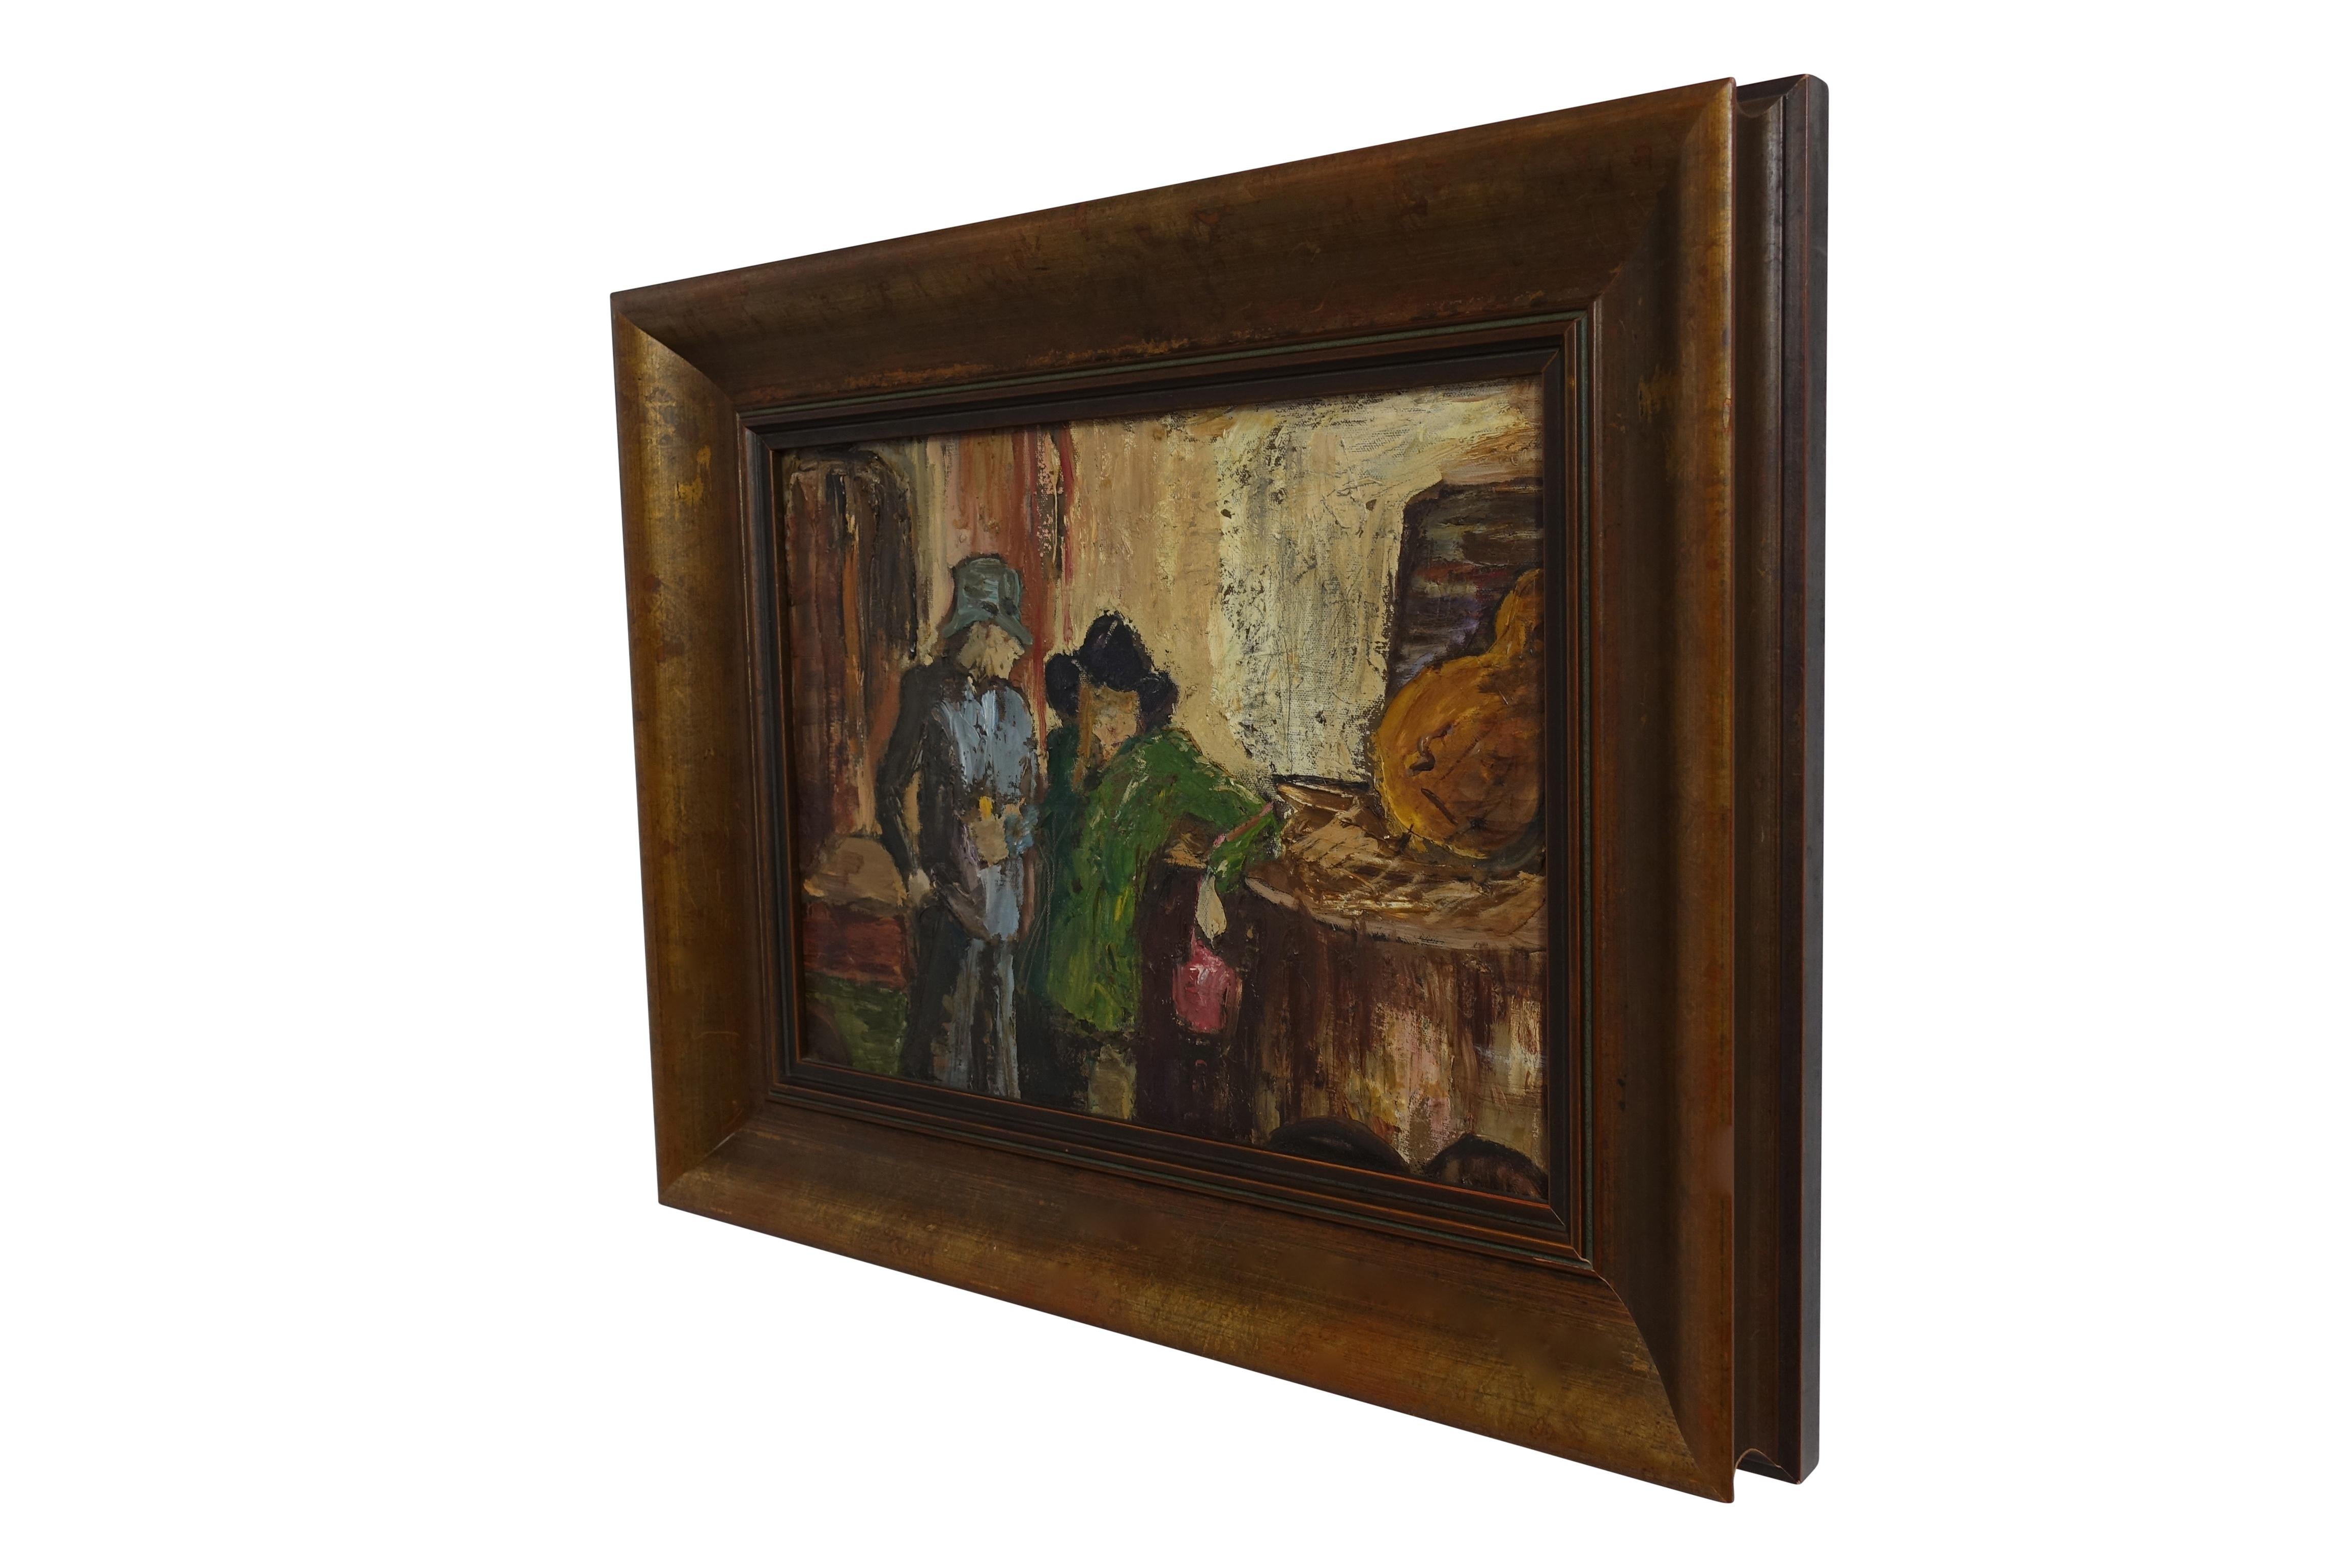 Bar scene or music scene painting, oil on canvas in painted wood frame, mid-20th century. Signed on the back stretcher bar P Archer.